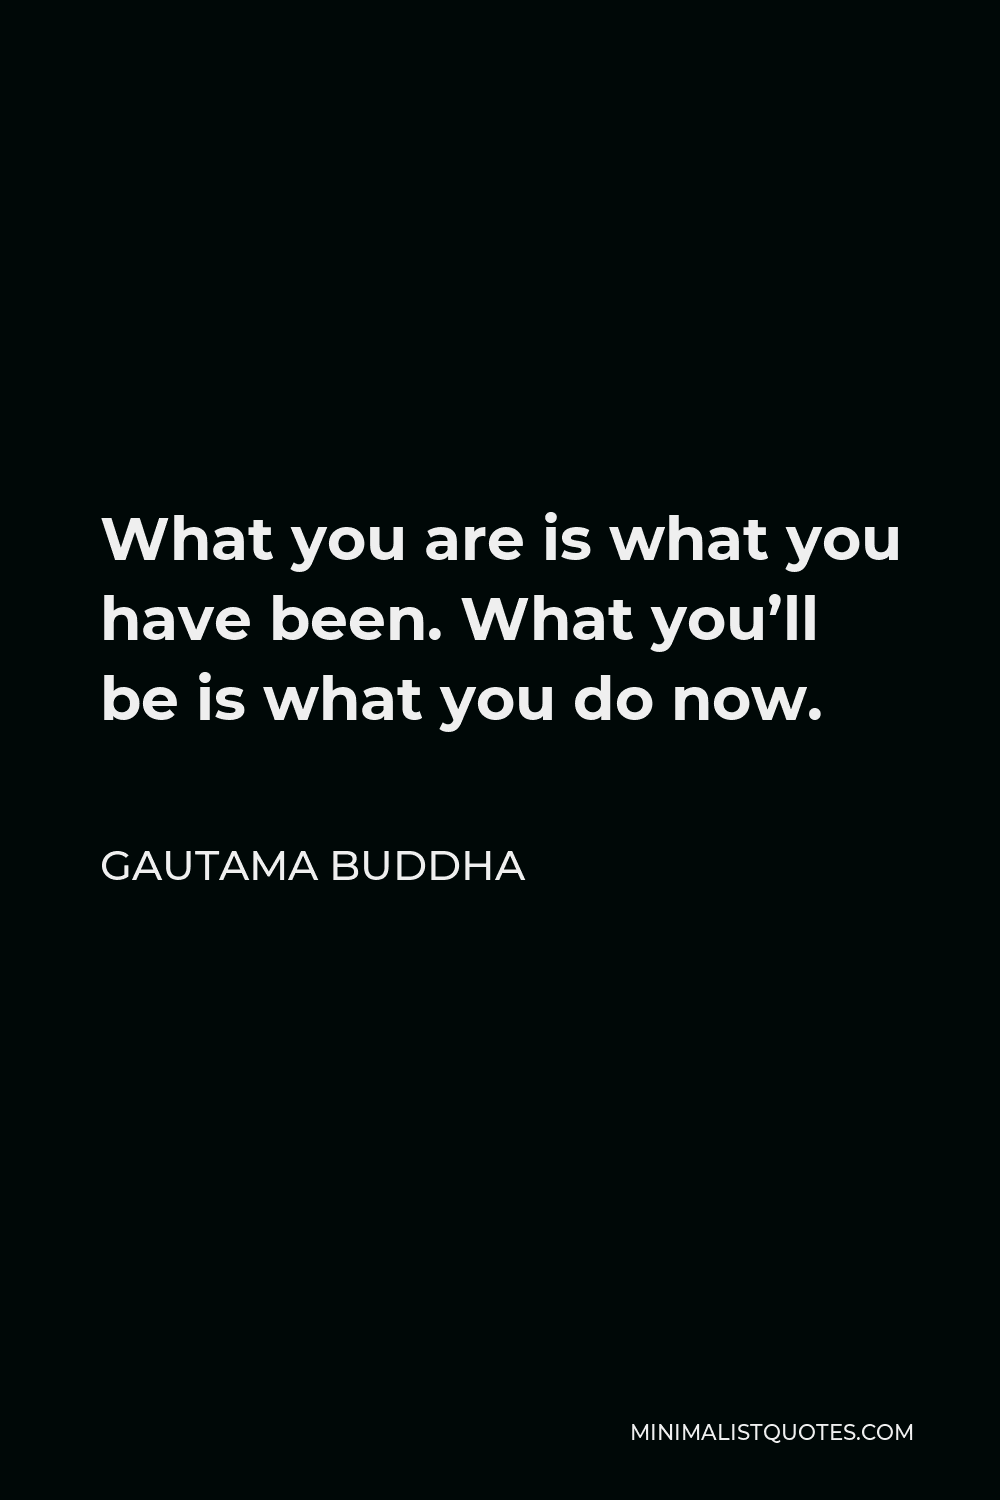 Gautama Buddha Quote - What you are is what you have been. What you’ll be is what you do now.